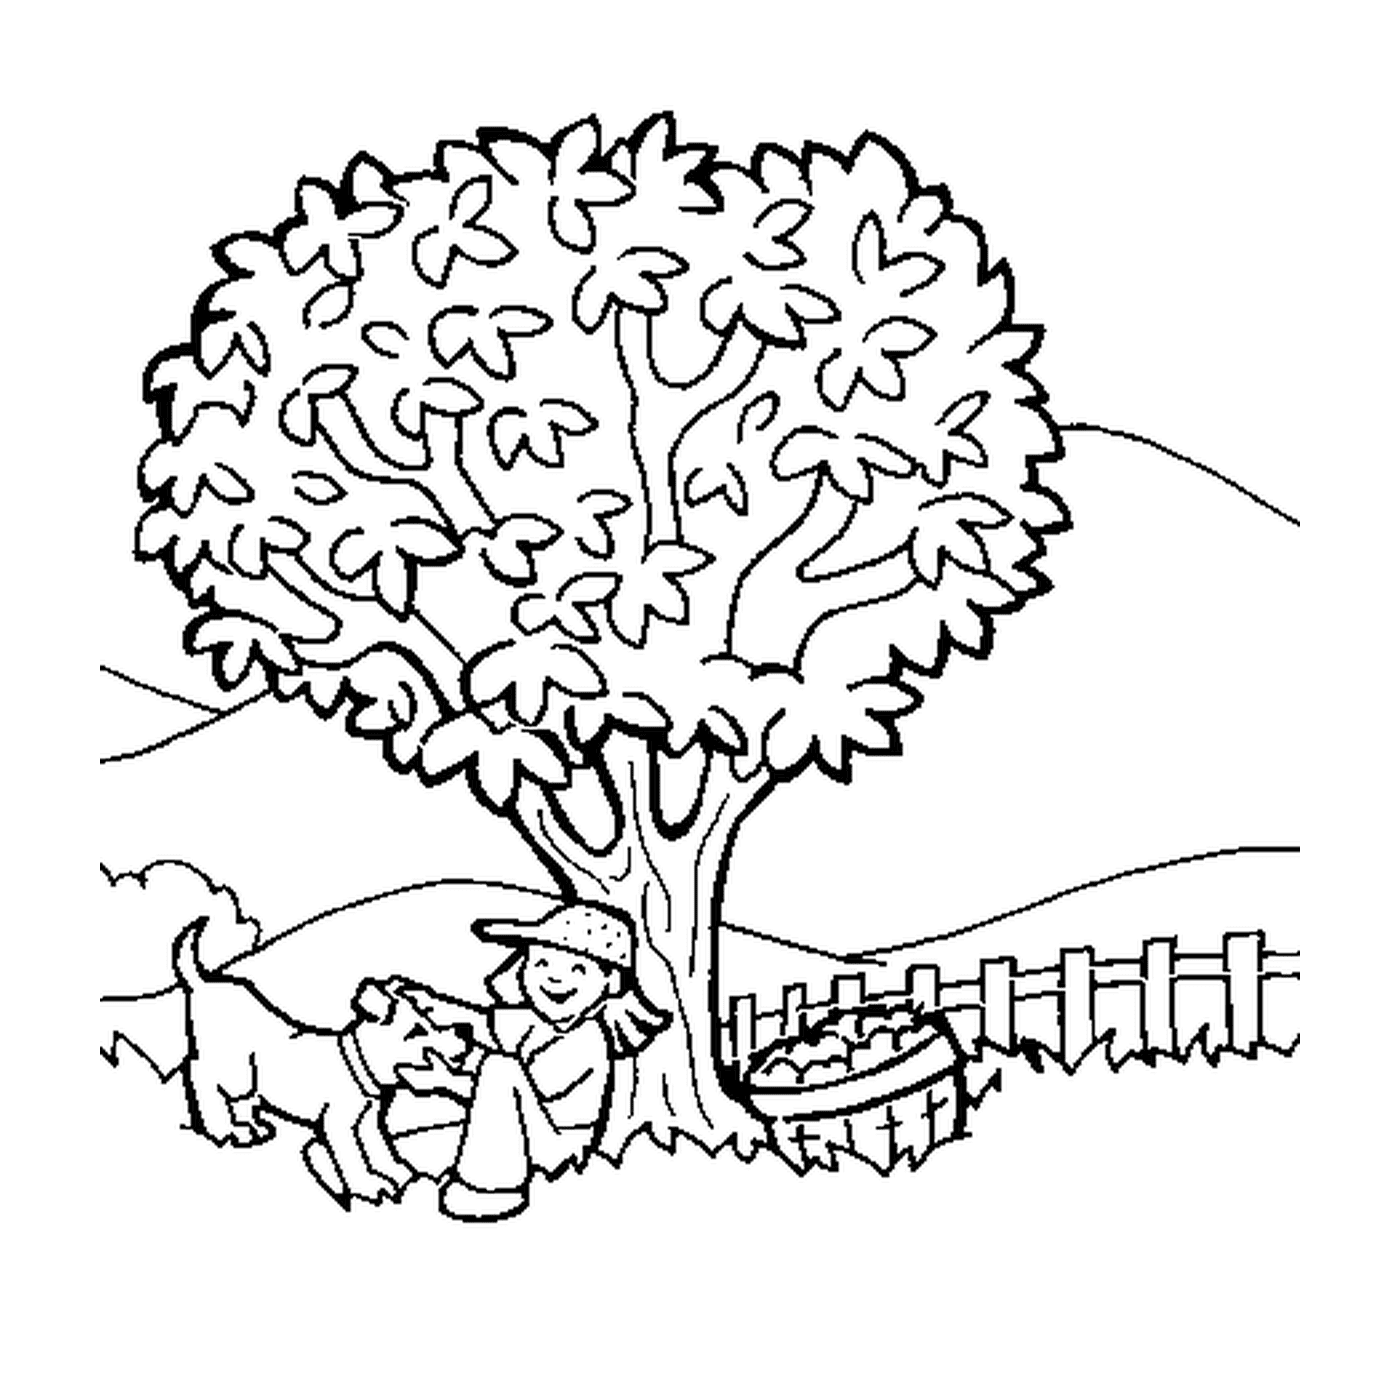  A tree and a dog 